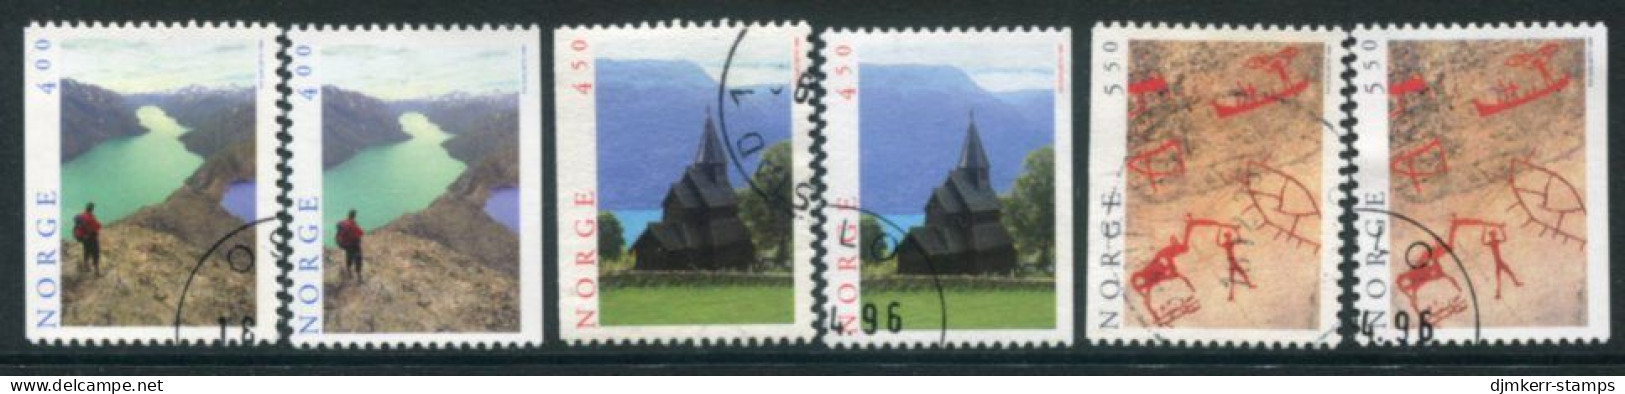 NORWAY 1996 Tourism Used.   Michel 1208-10 Dl-Dr - Used Stamps